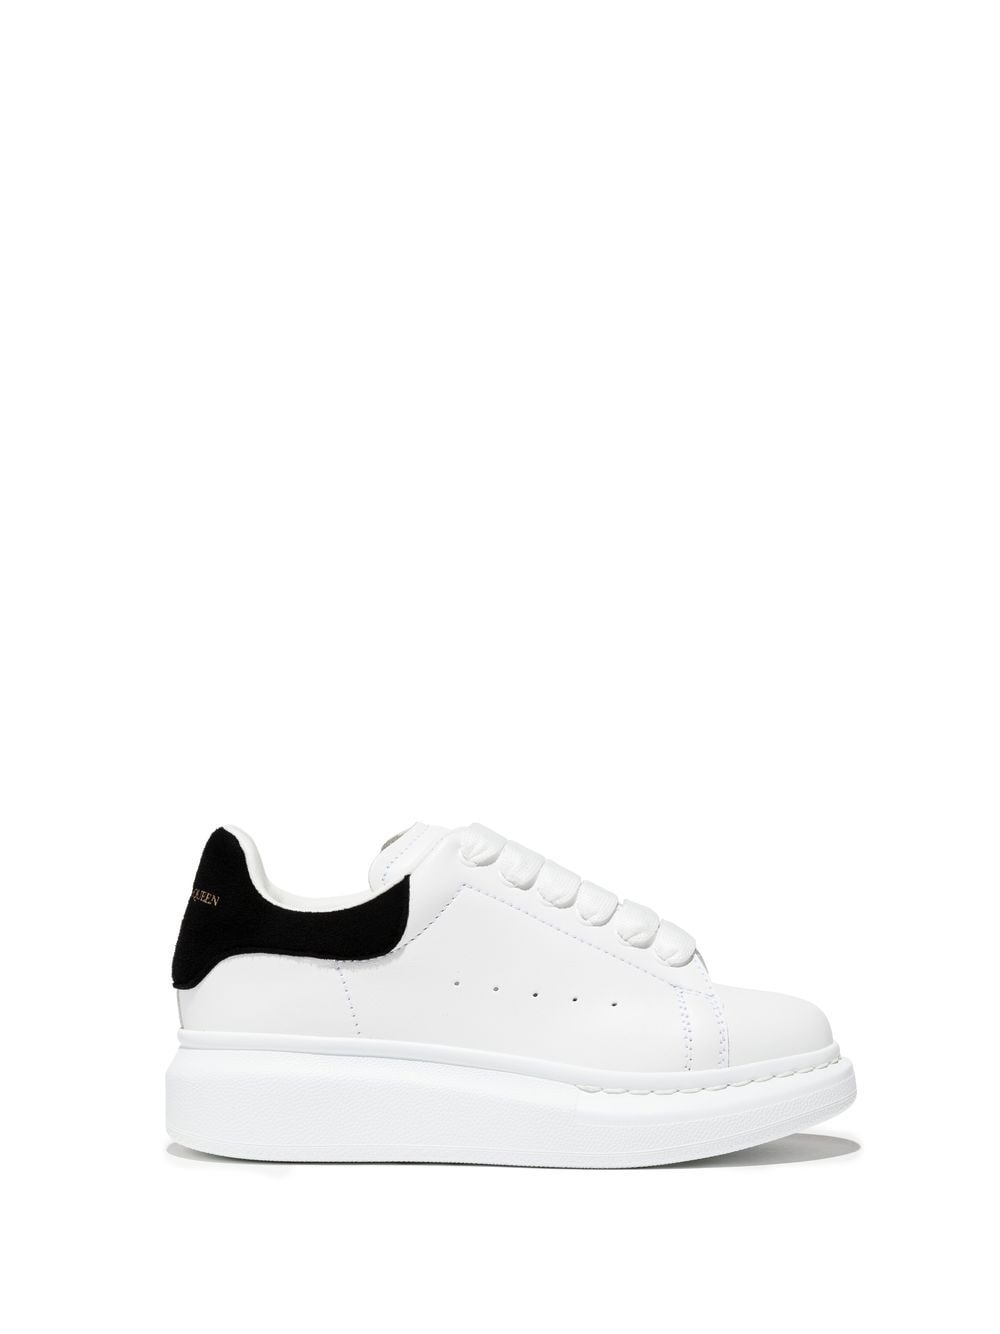 White/black leather oversidez lace-up sneakers